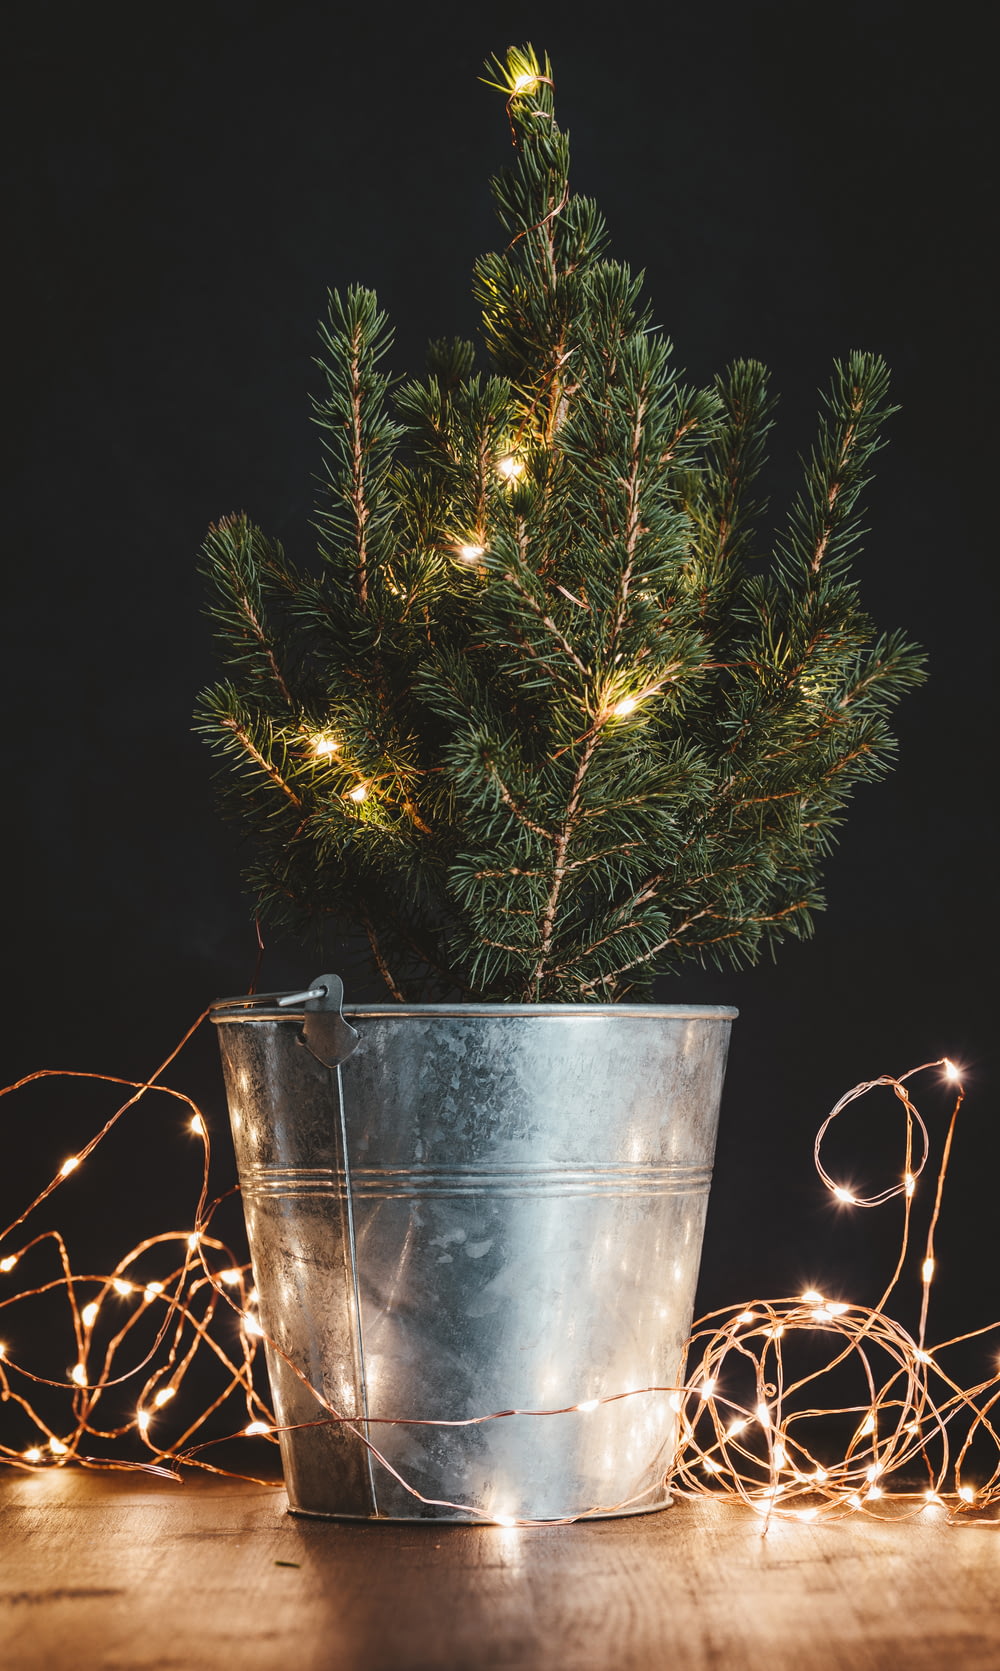 green Christmas tree in bucket with string lights